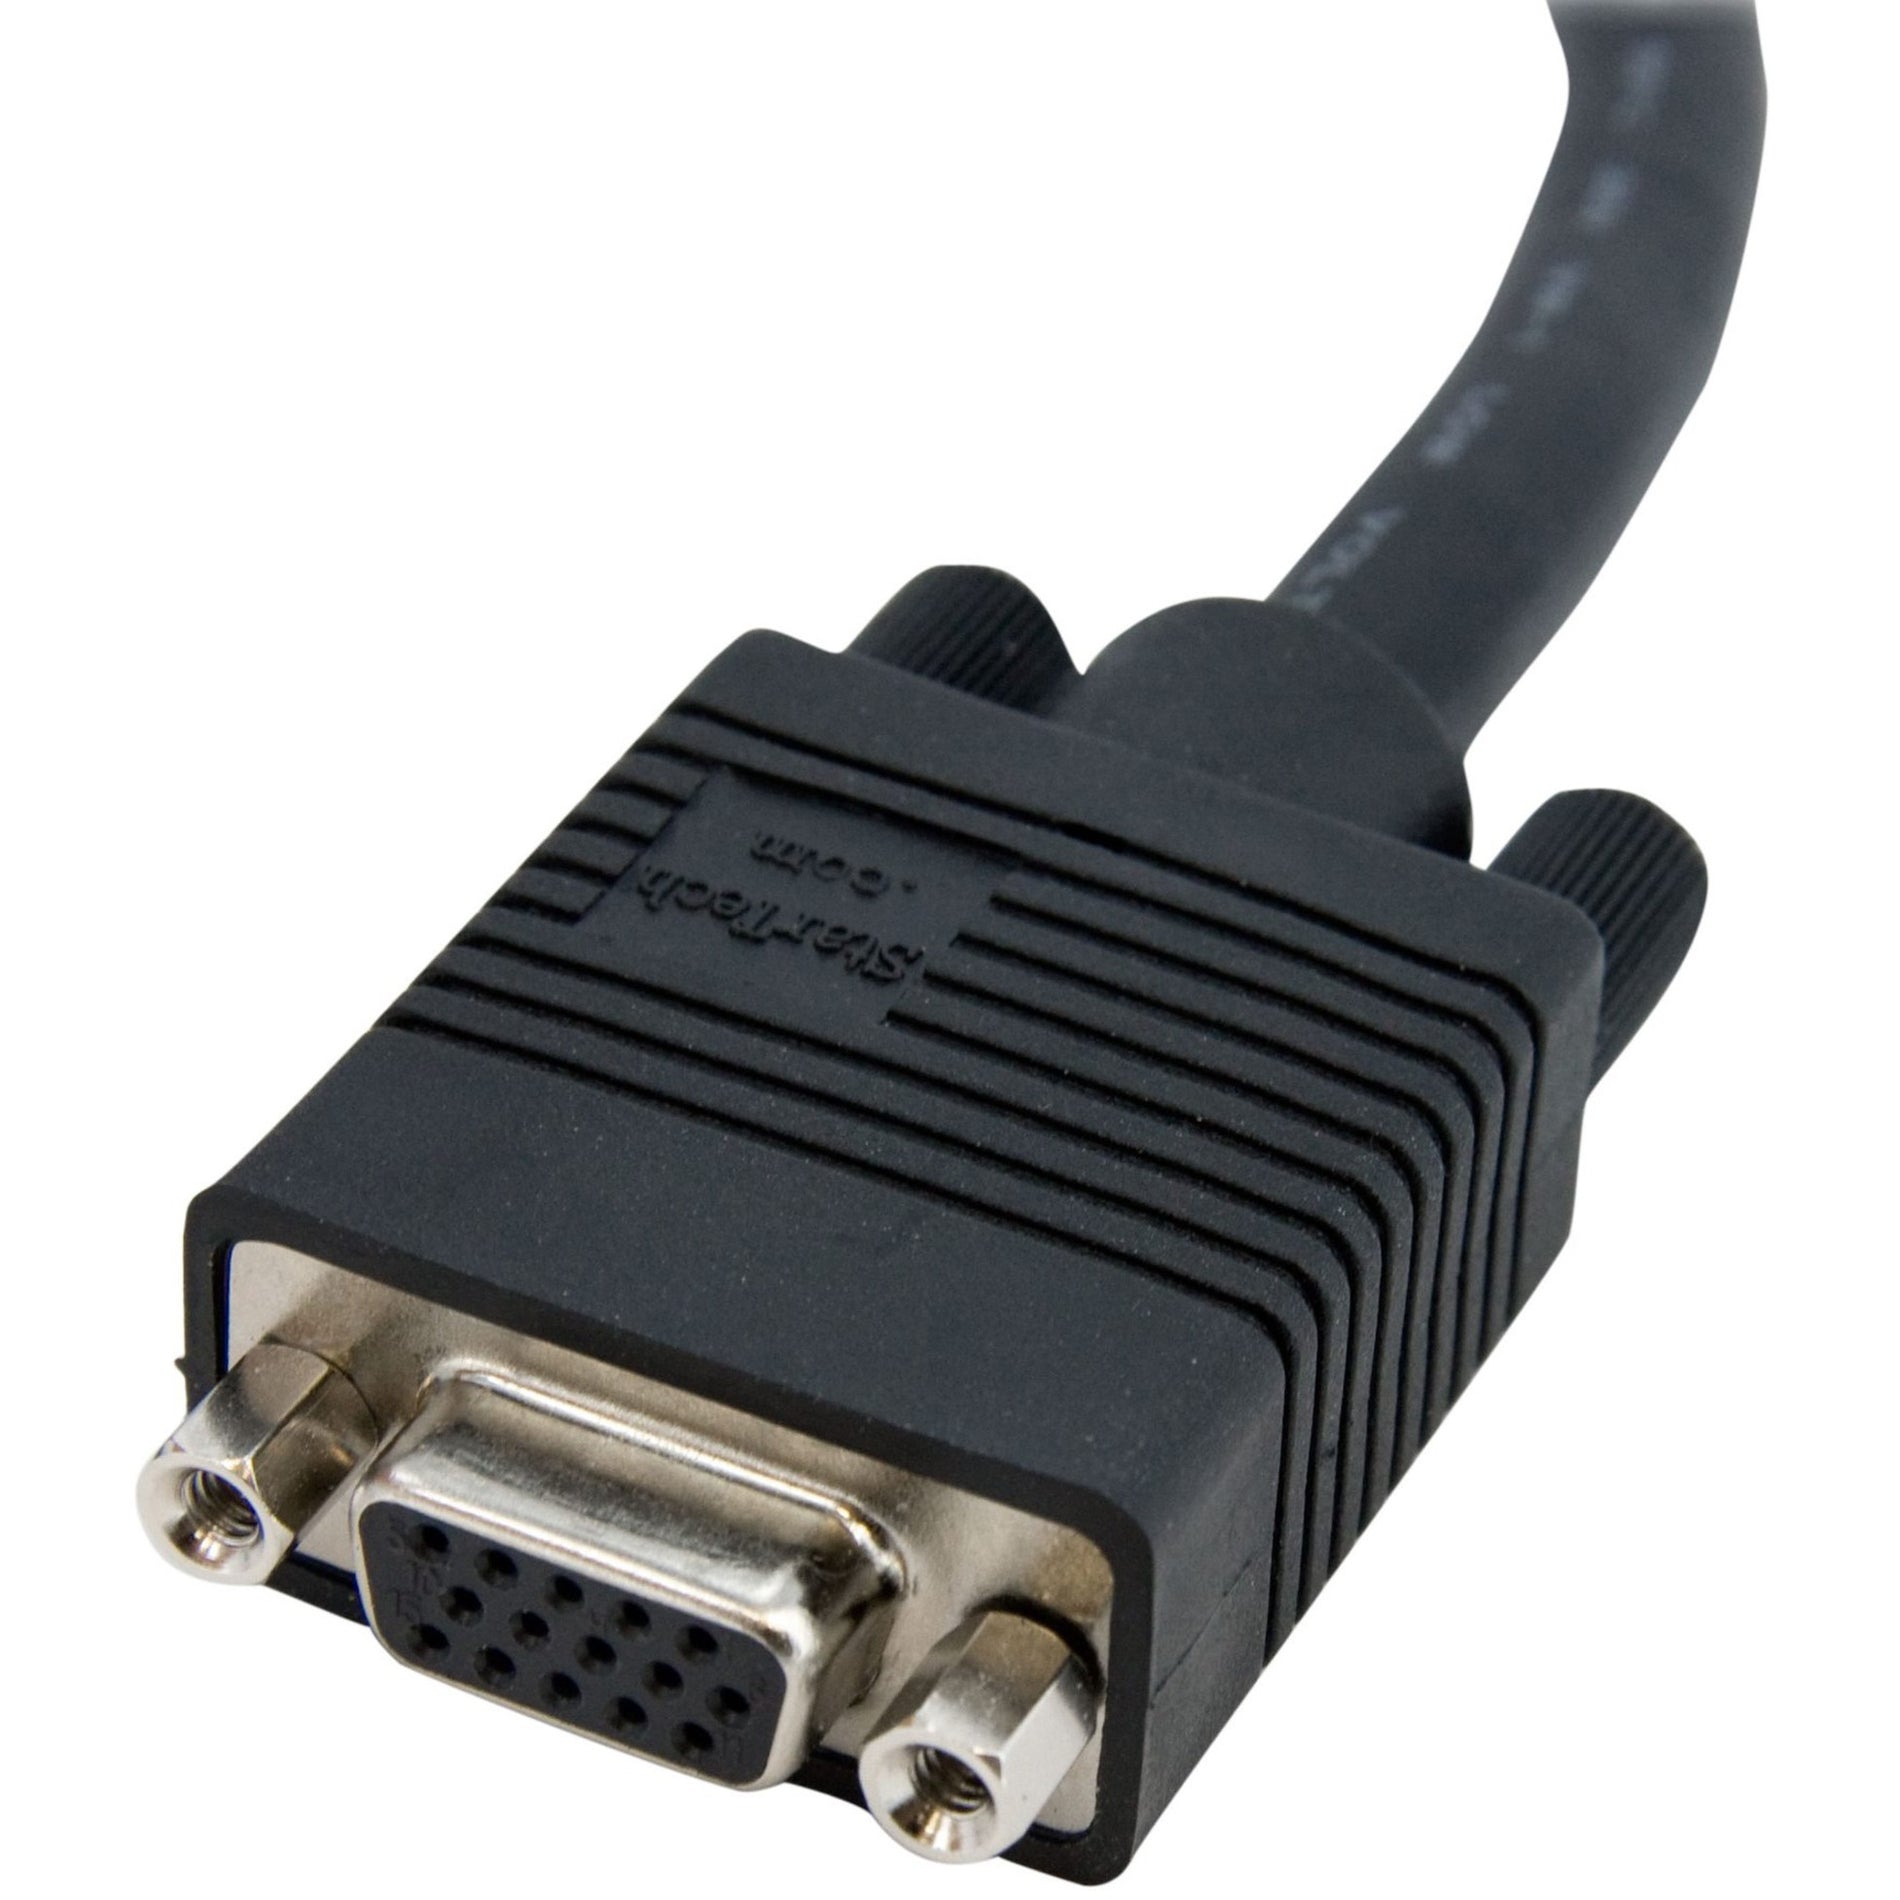 StarTech.com MXT101HQ35 Coax SVGA Monitor Extension Cable, 35 ft - High-Resolution VGA Video Cable